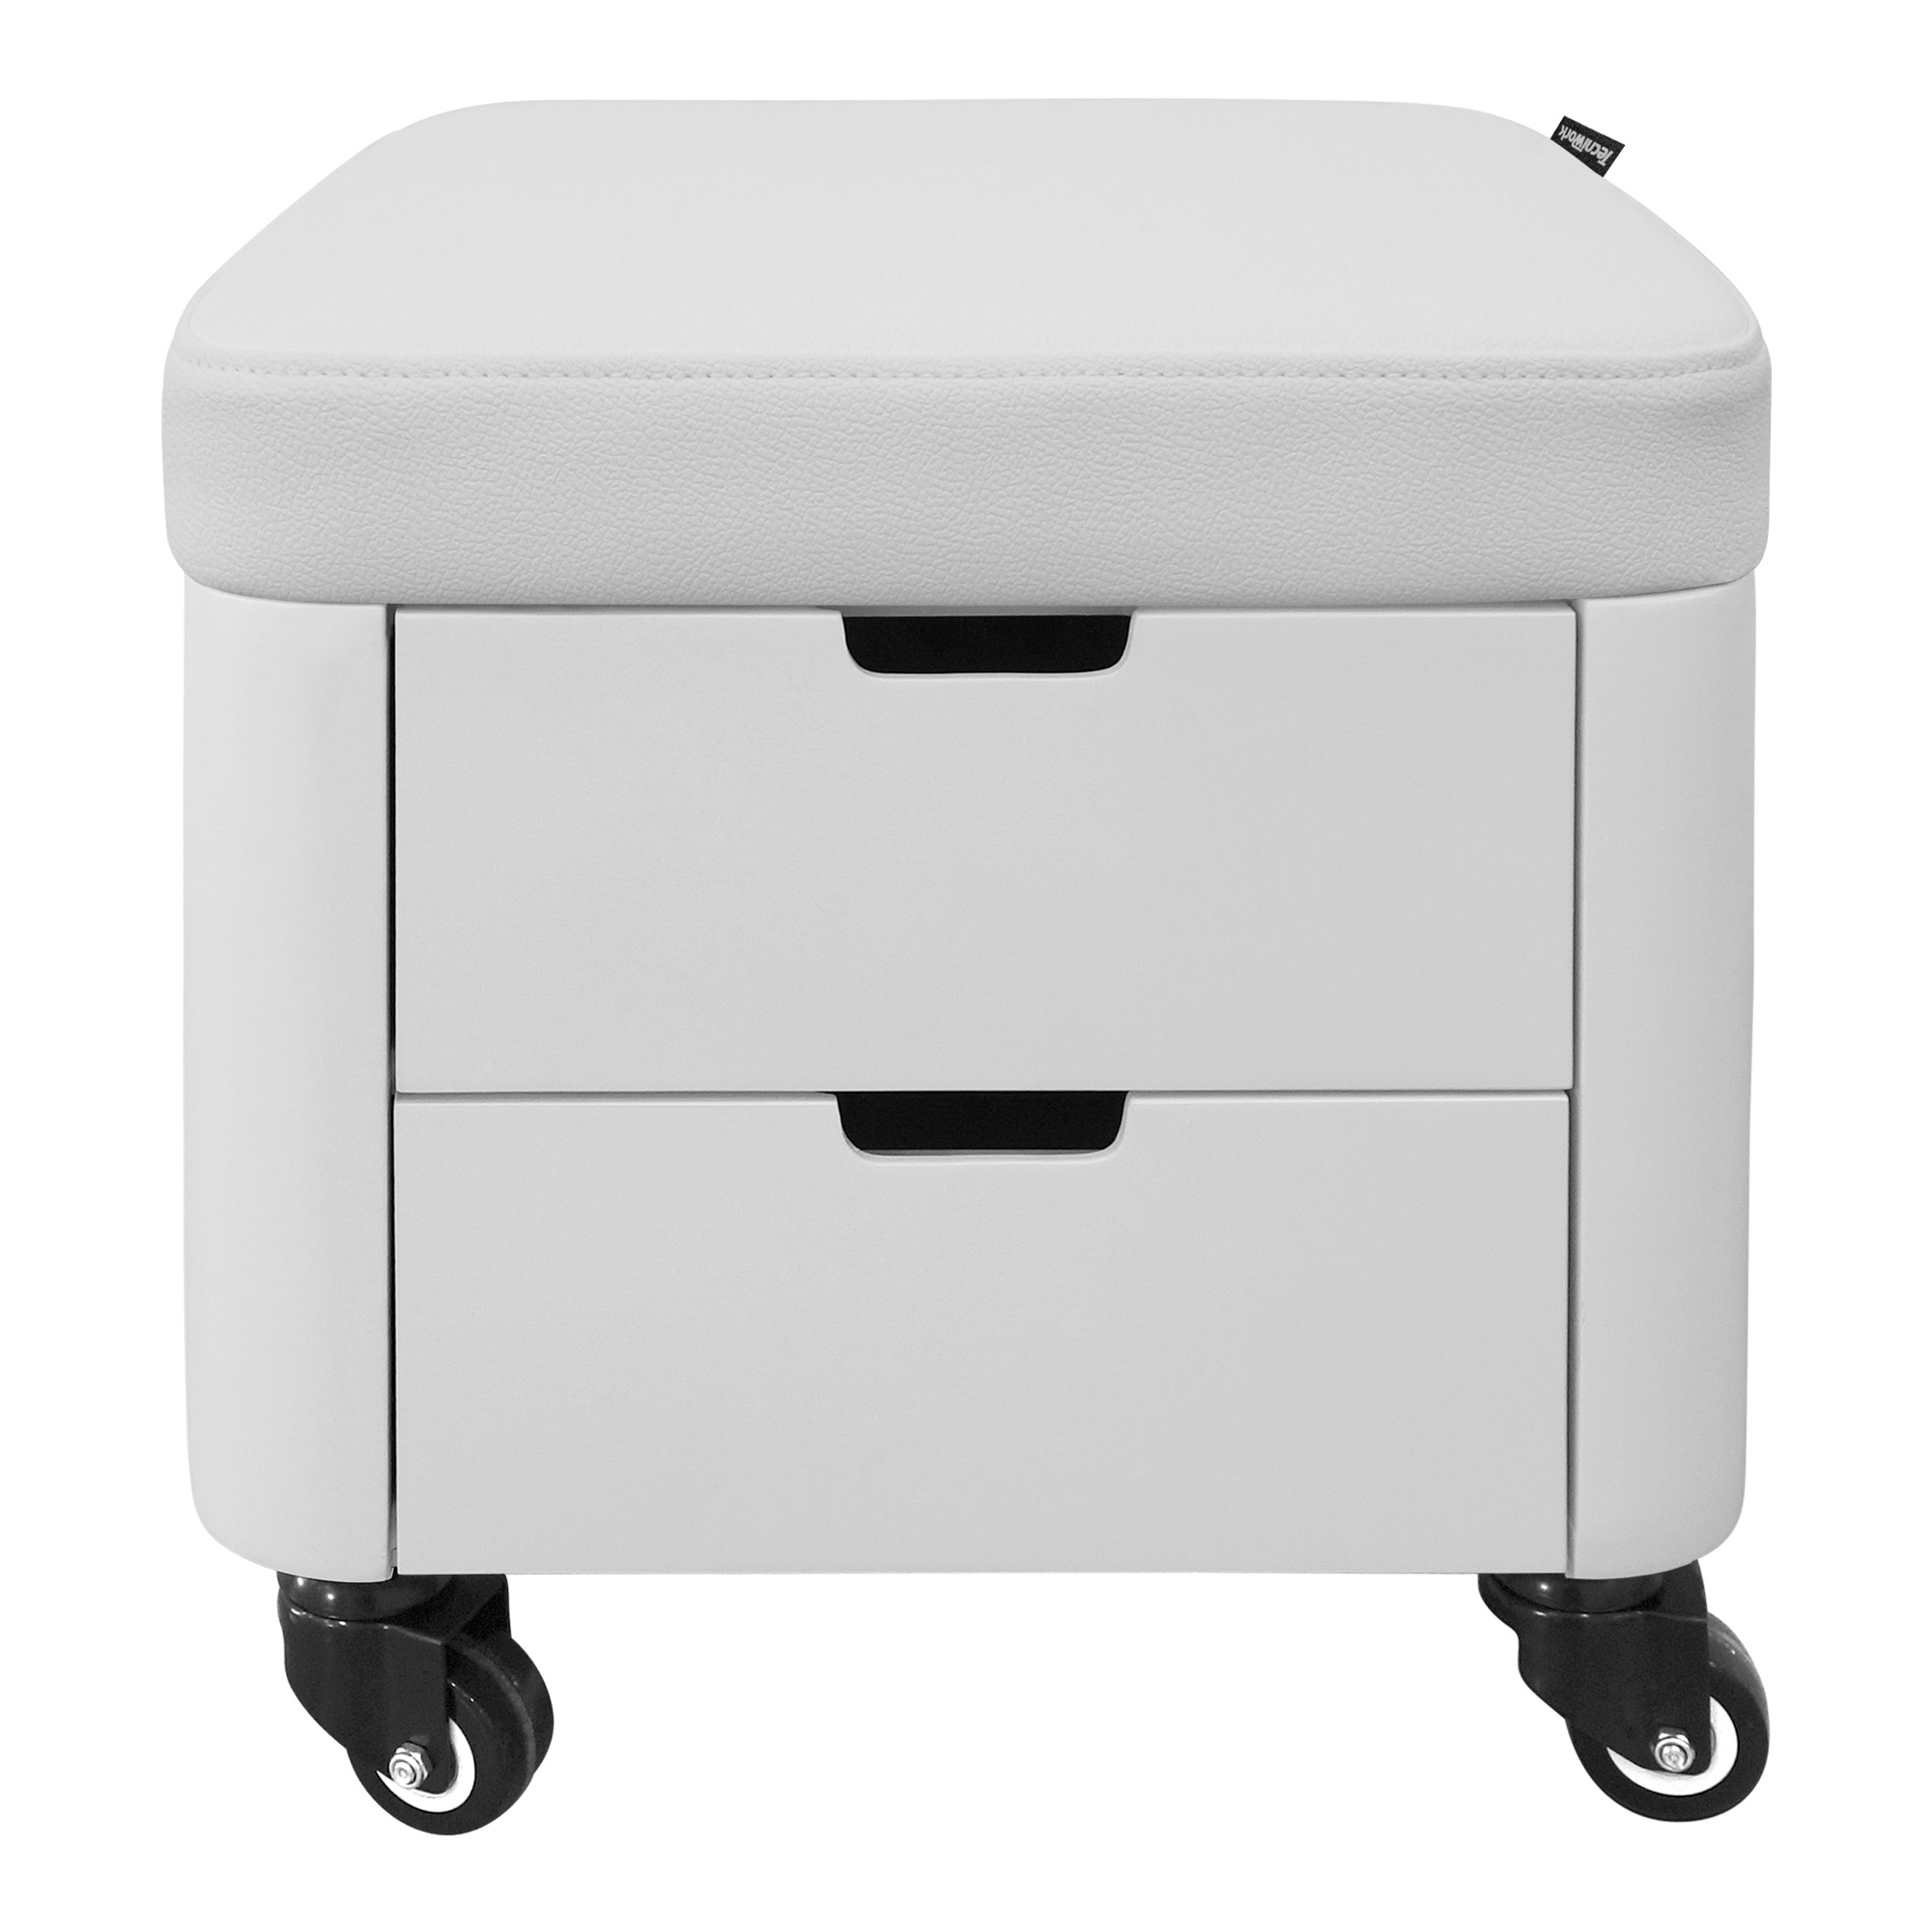 Manicure and pedicure seat with 2 drawers